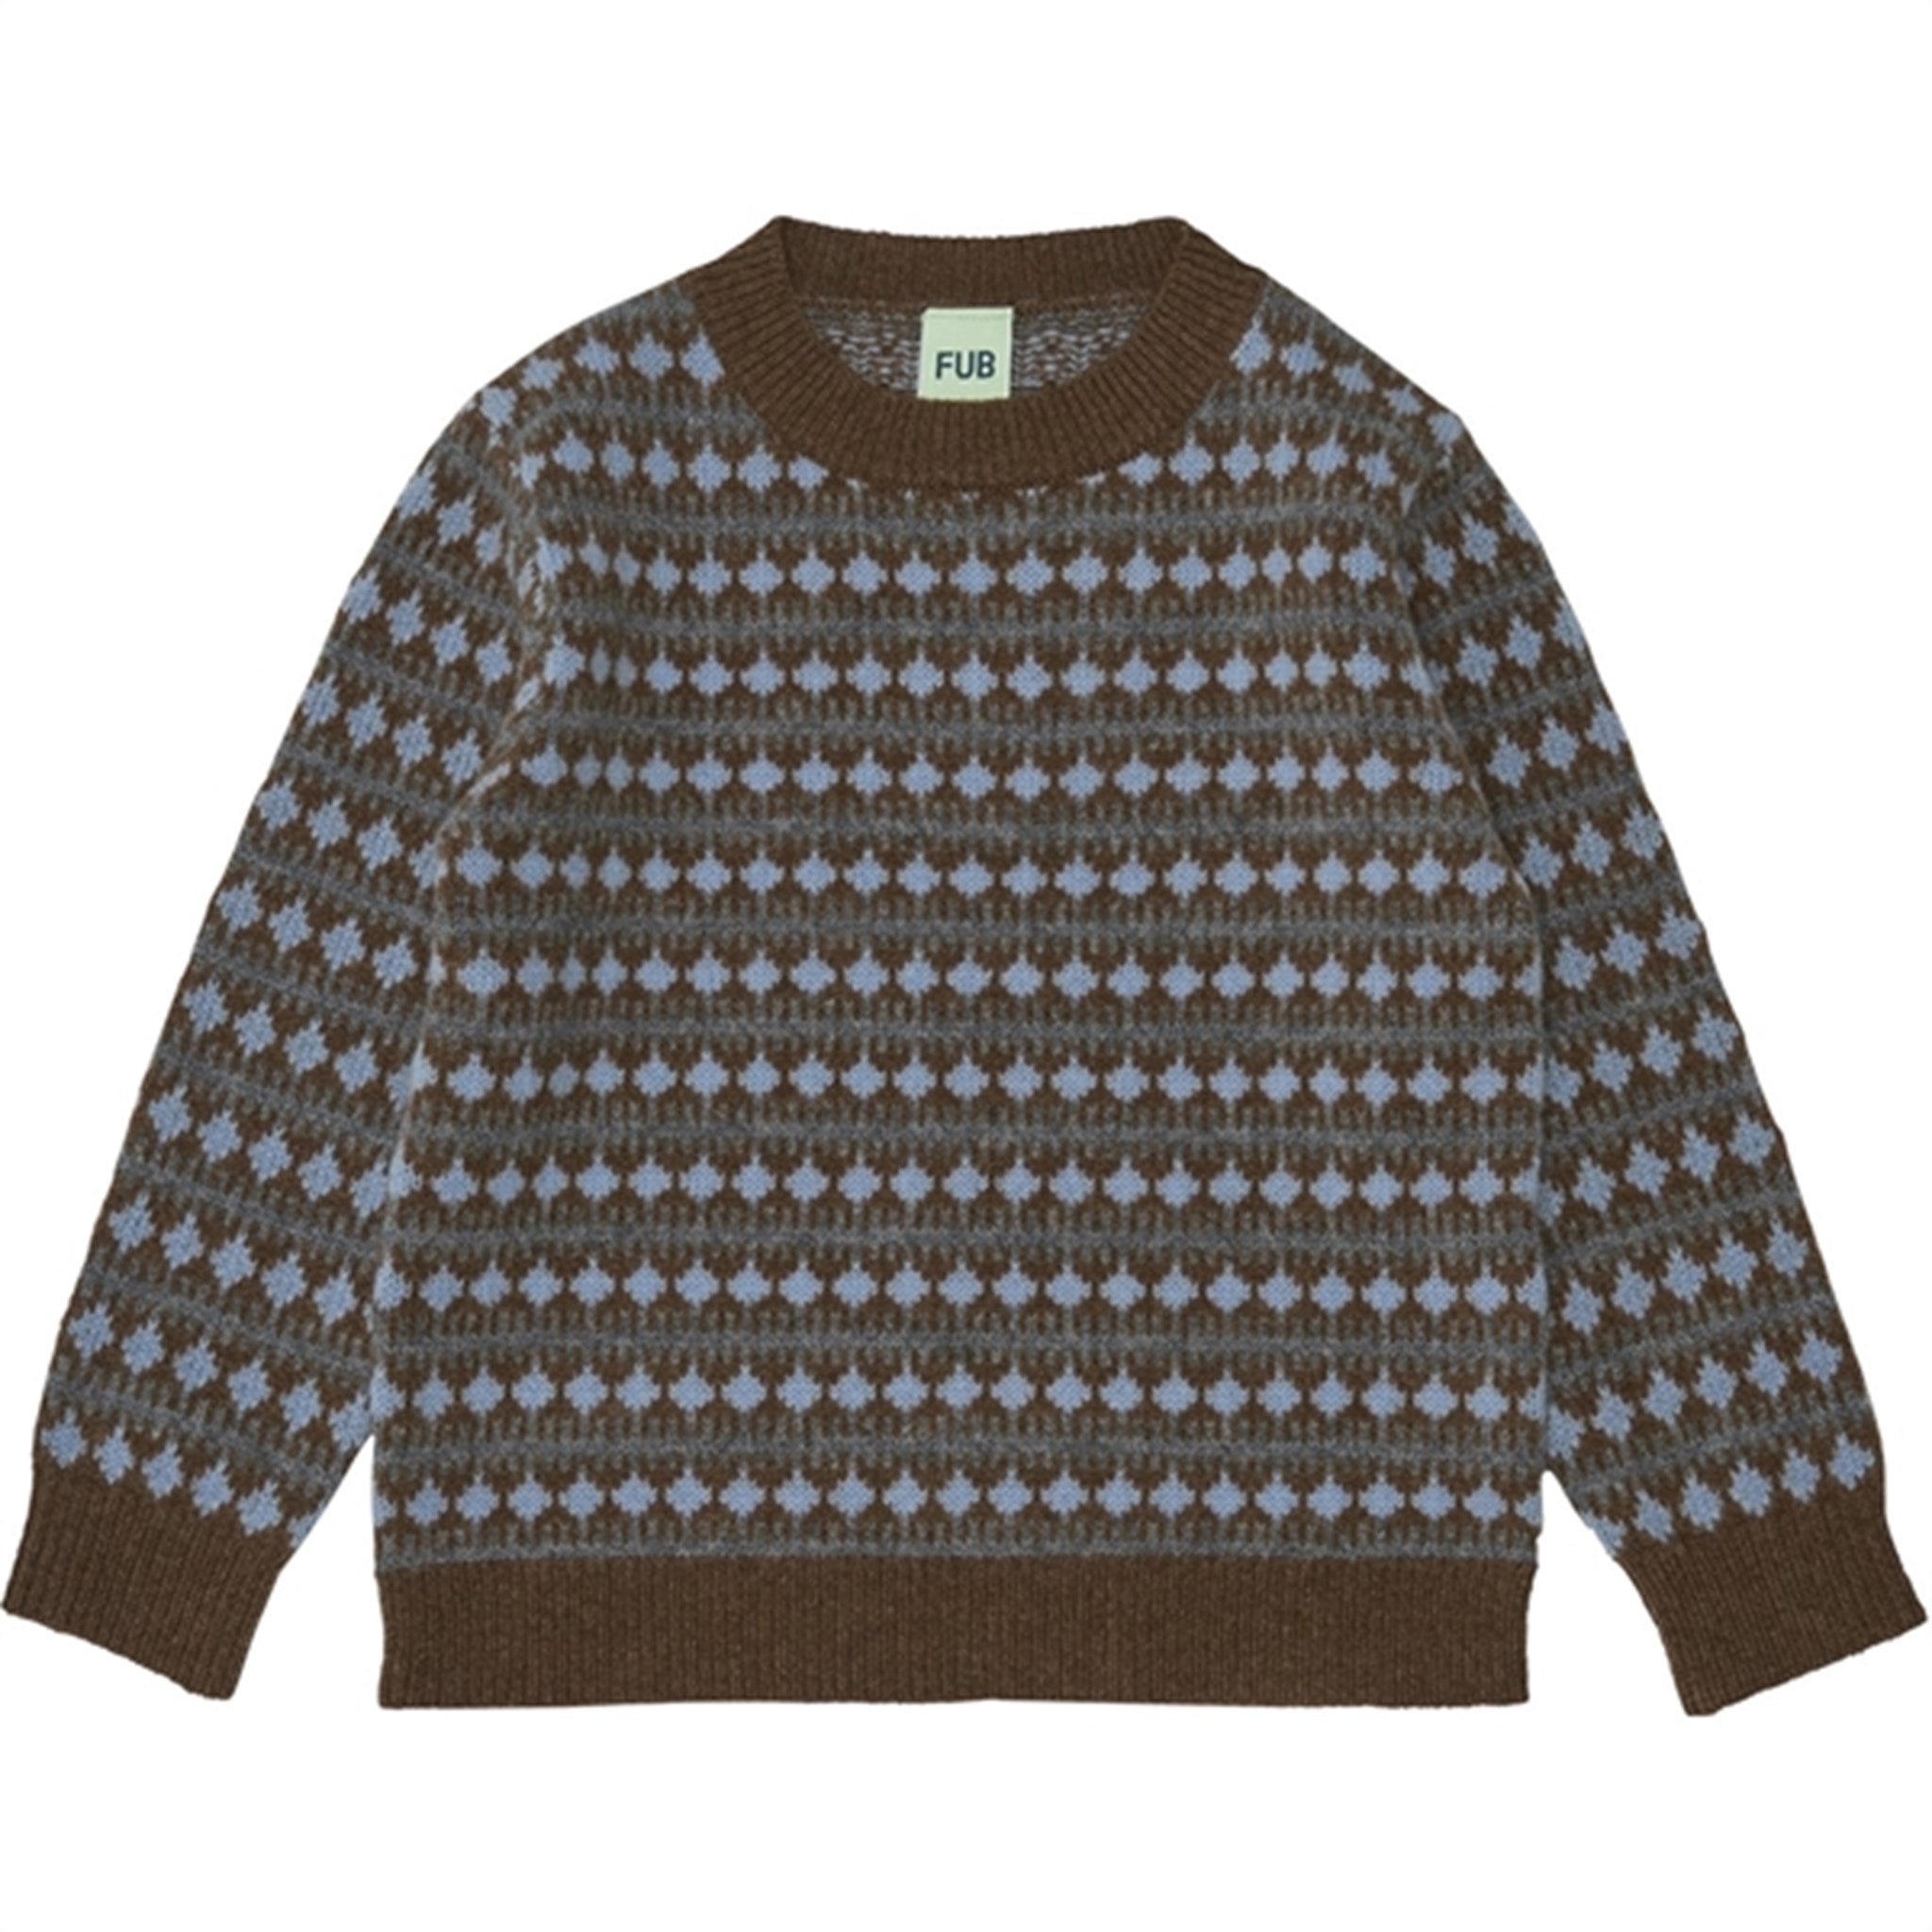 FUB Lambswool Knitted Sweater Amber